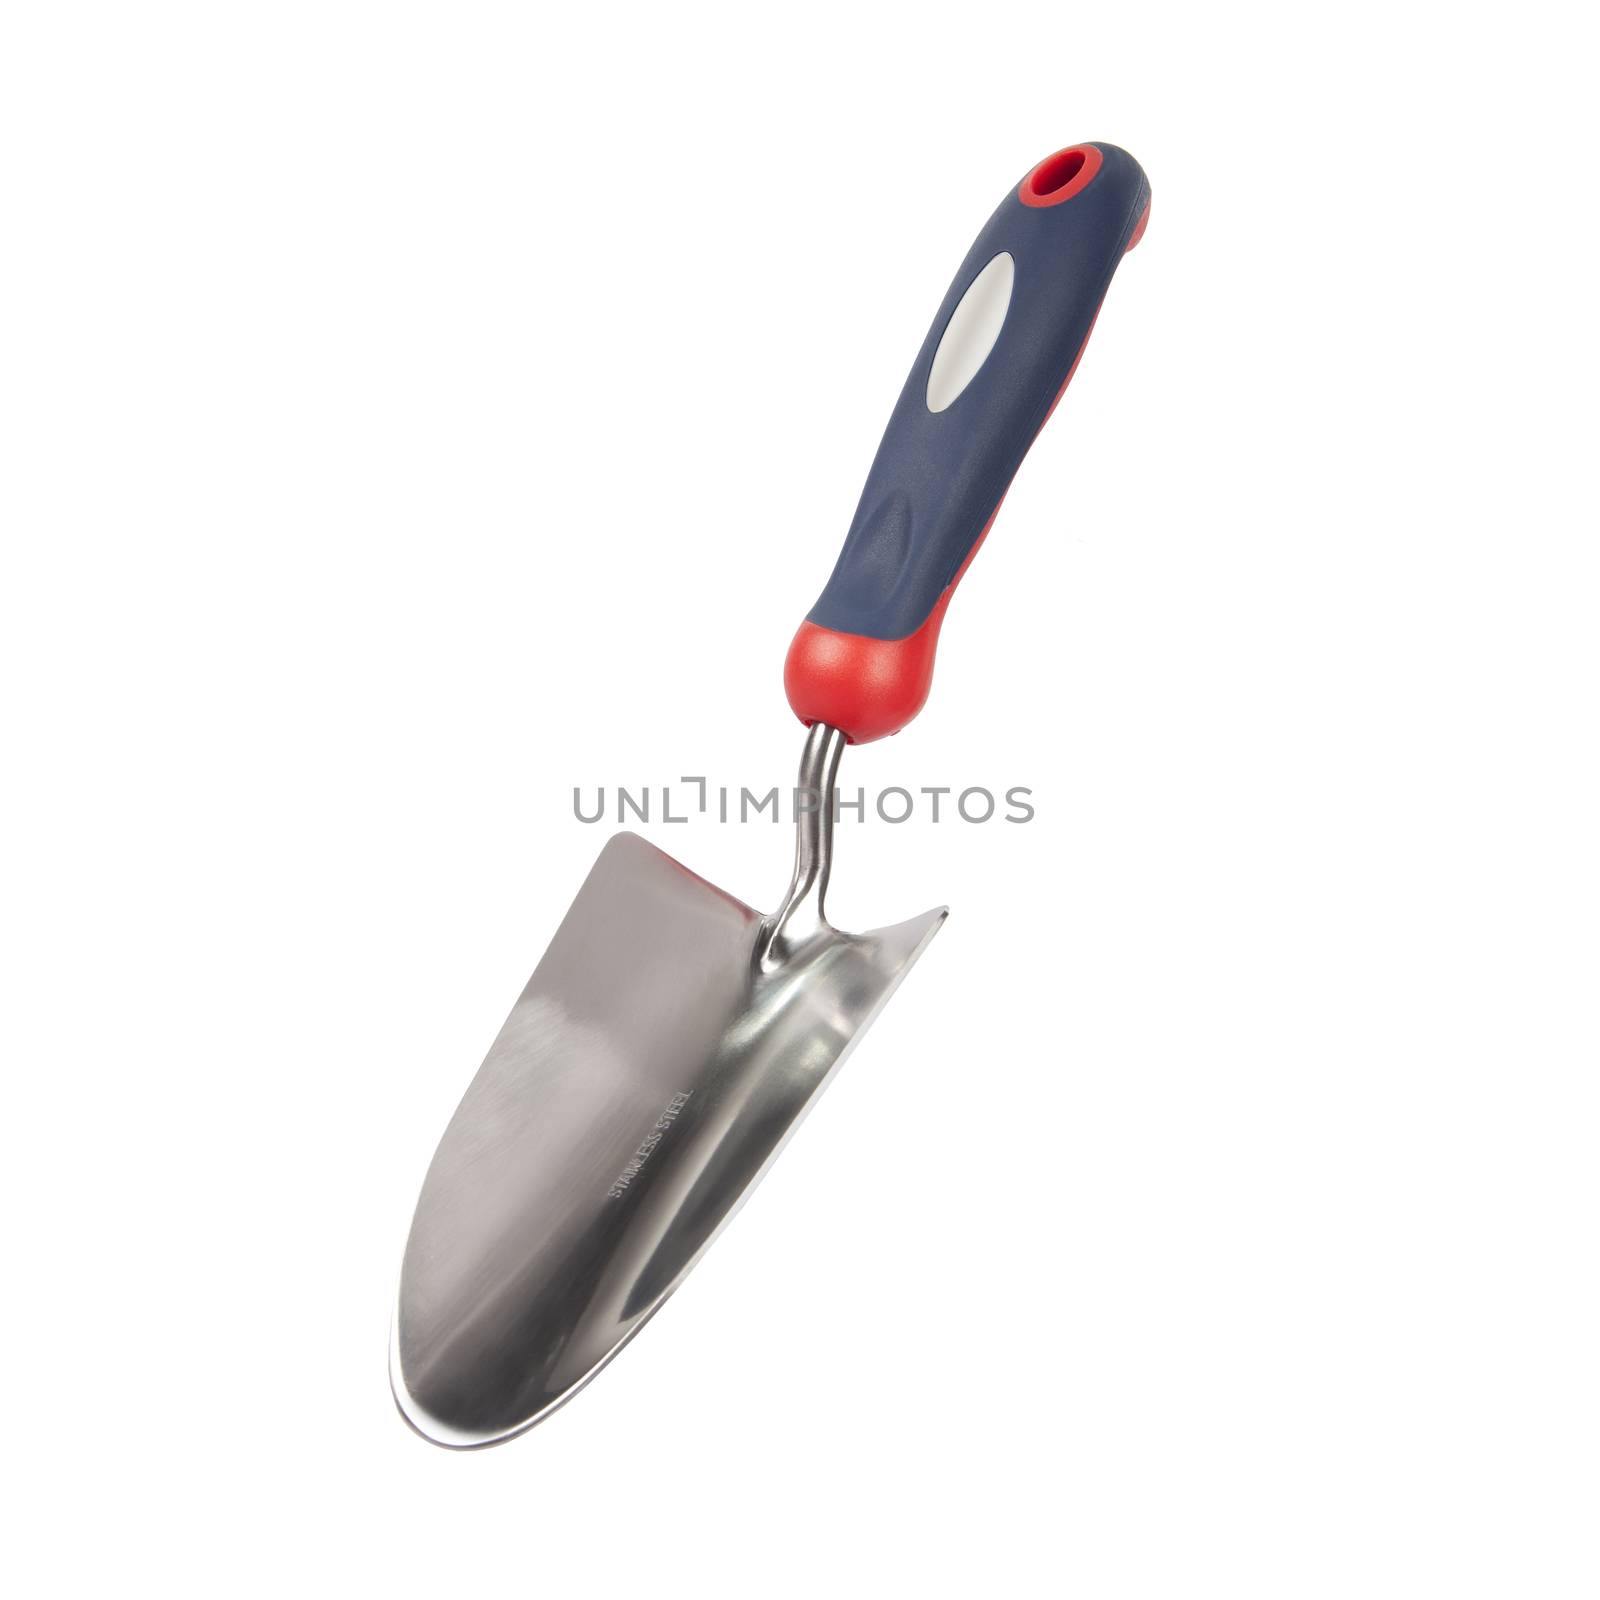 A silver trowel with a blue and red handle